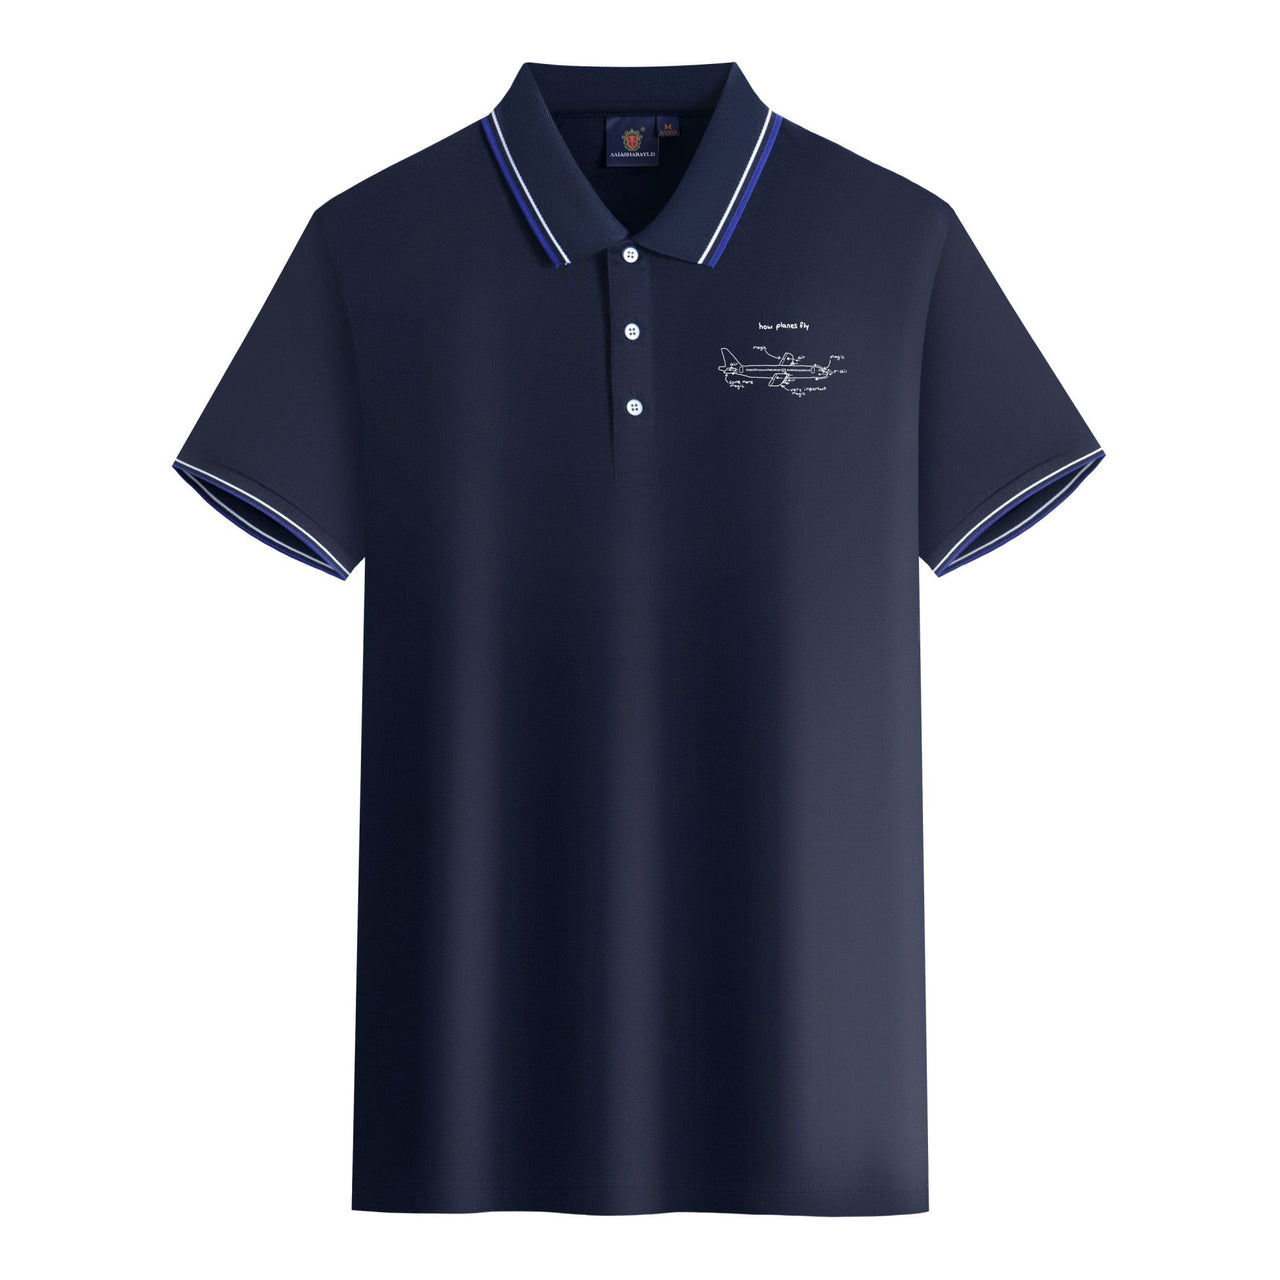 How Planes Fly Designed Stylish Polo T-Shirts